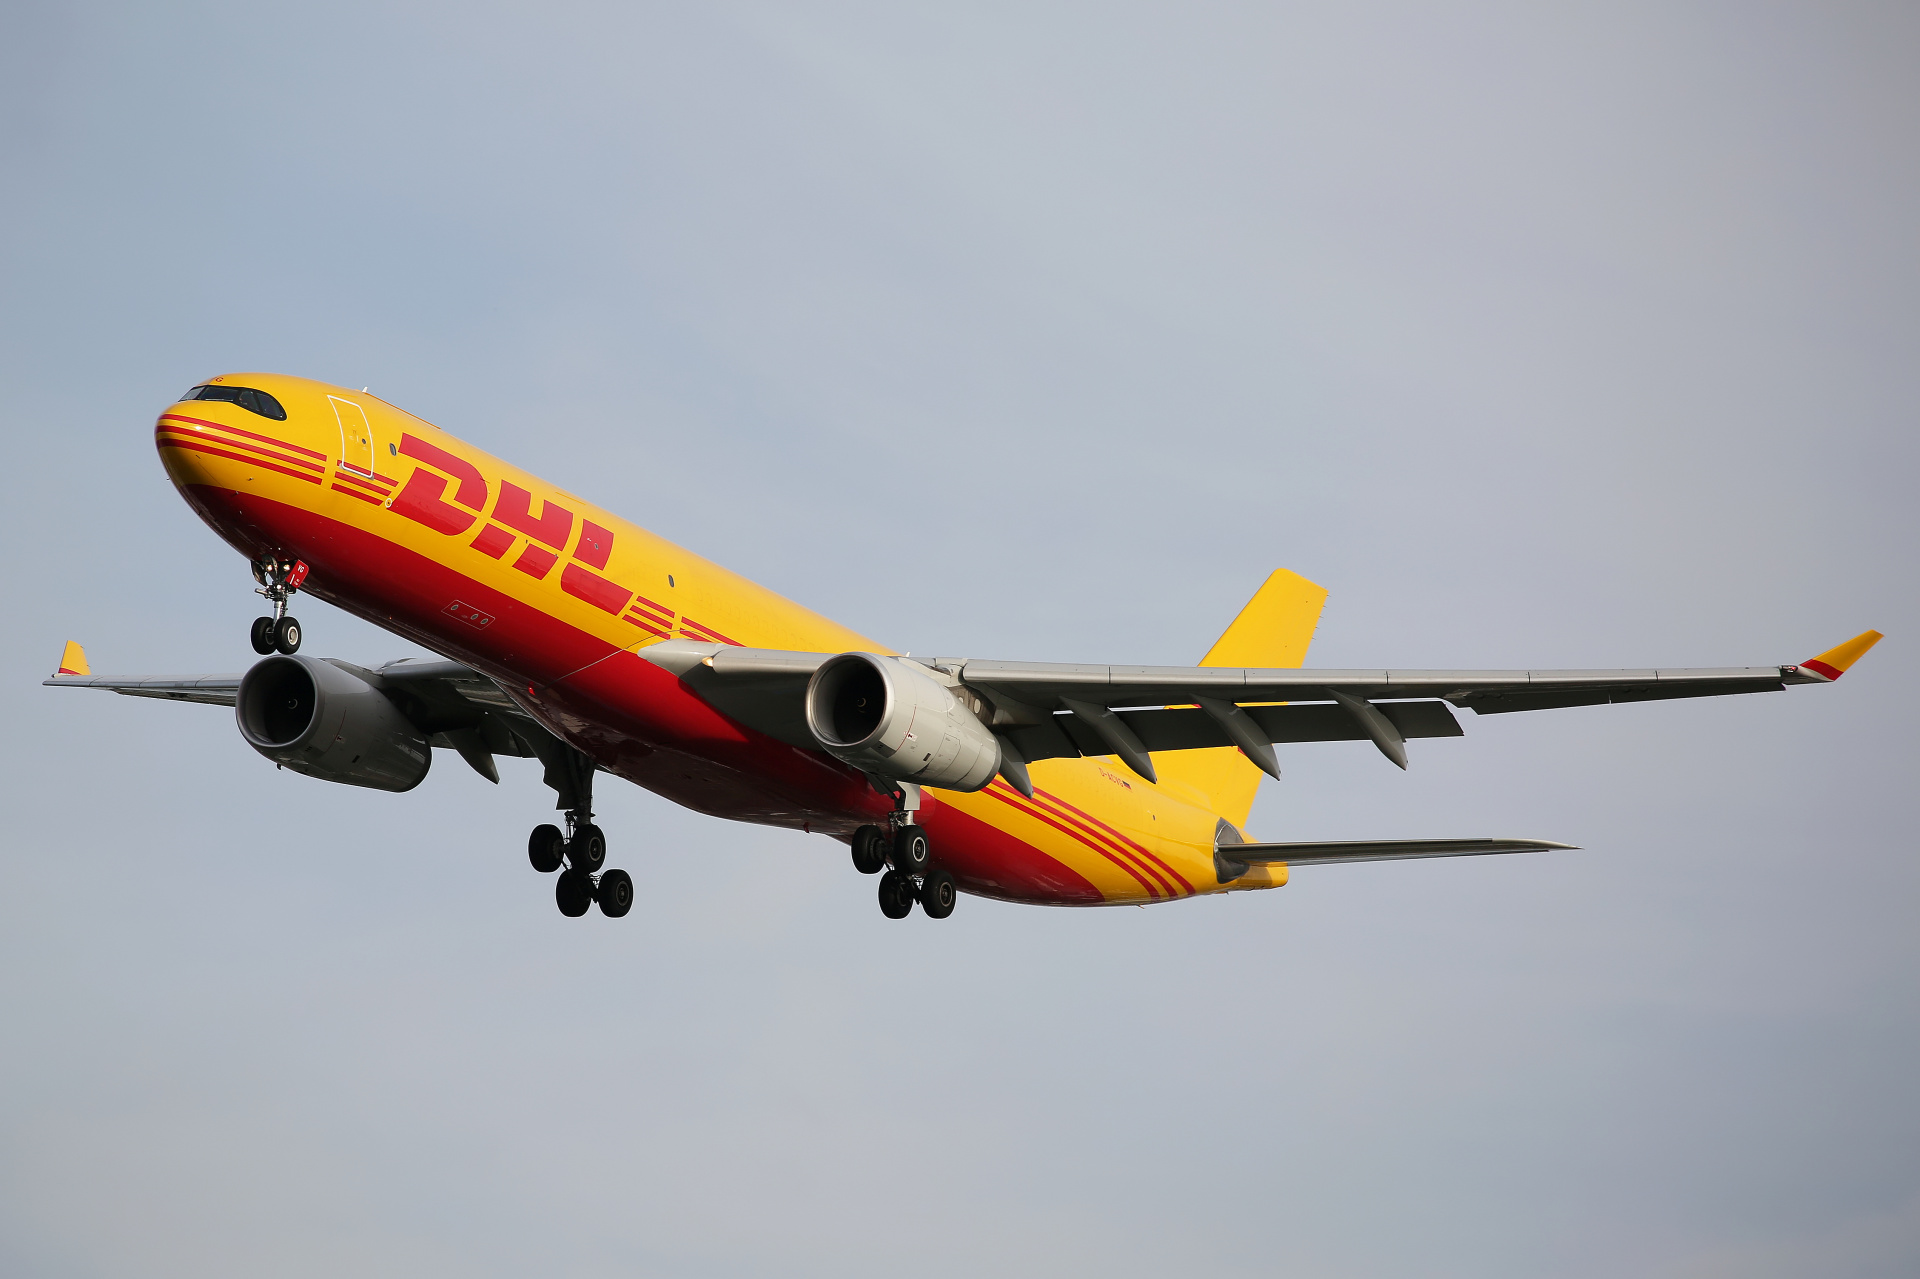 D-ACVG, DHL (EAT Leipzig) (Samoloty » Spotting na Schiphol » Airbus A330-300P2F)